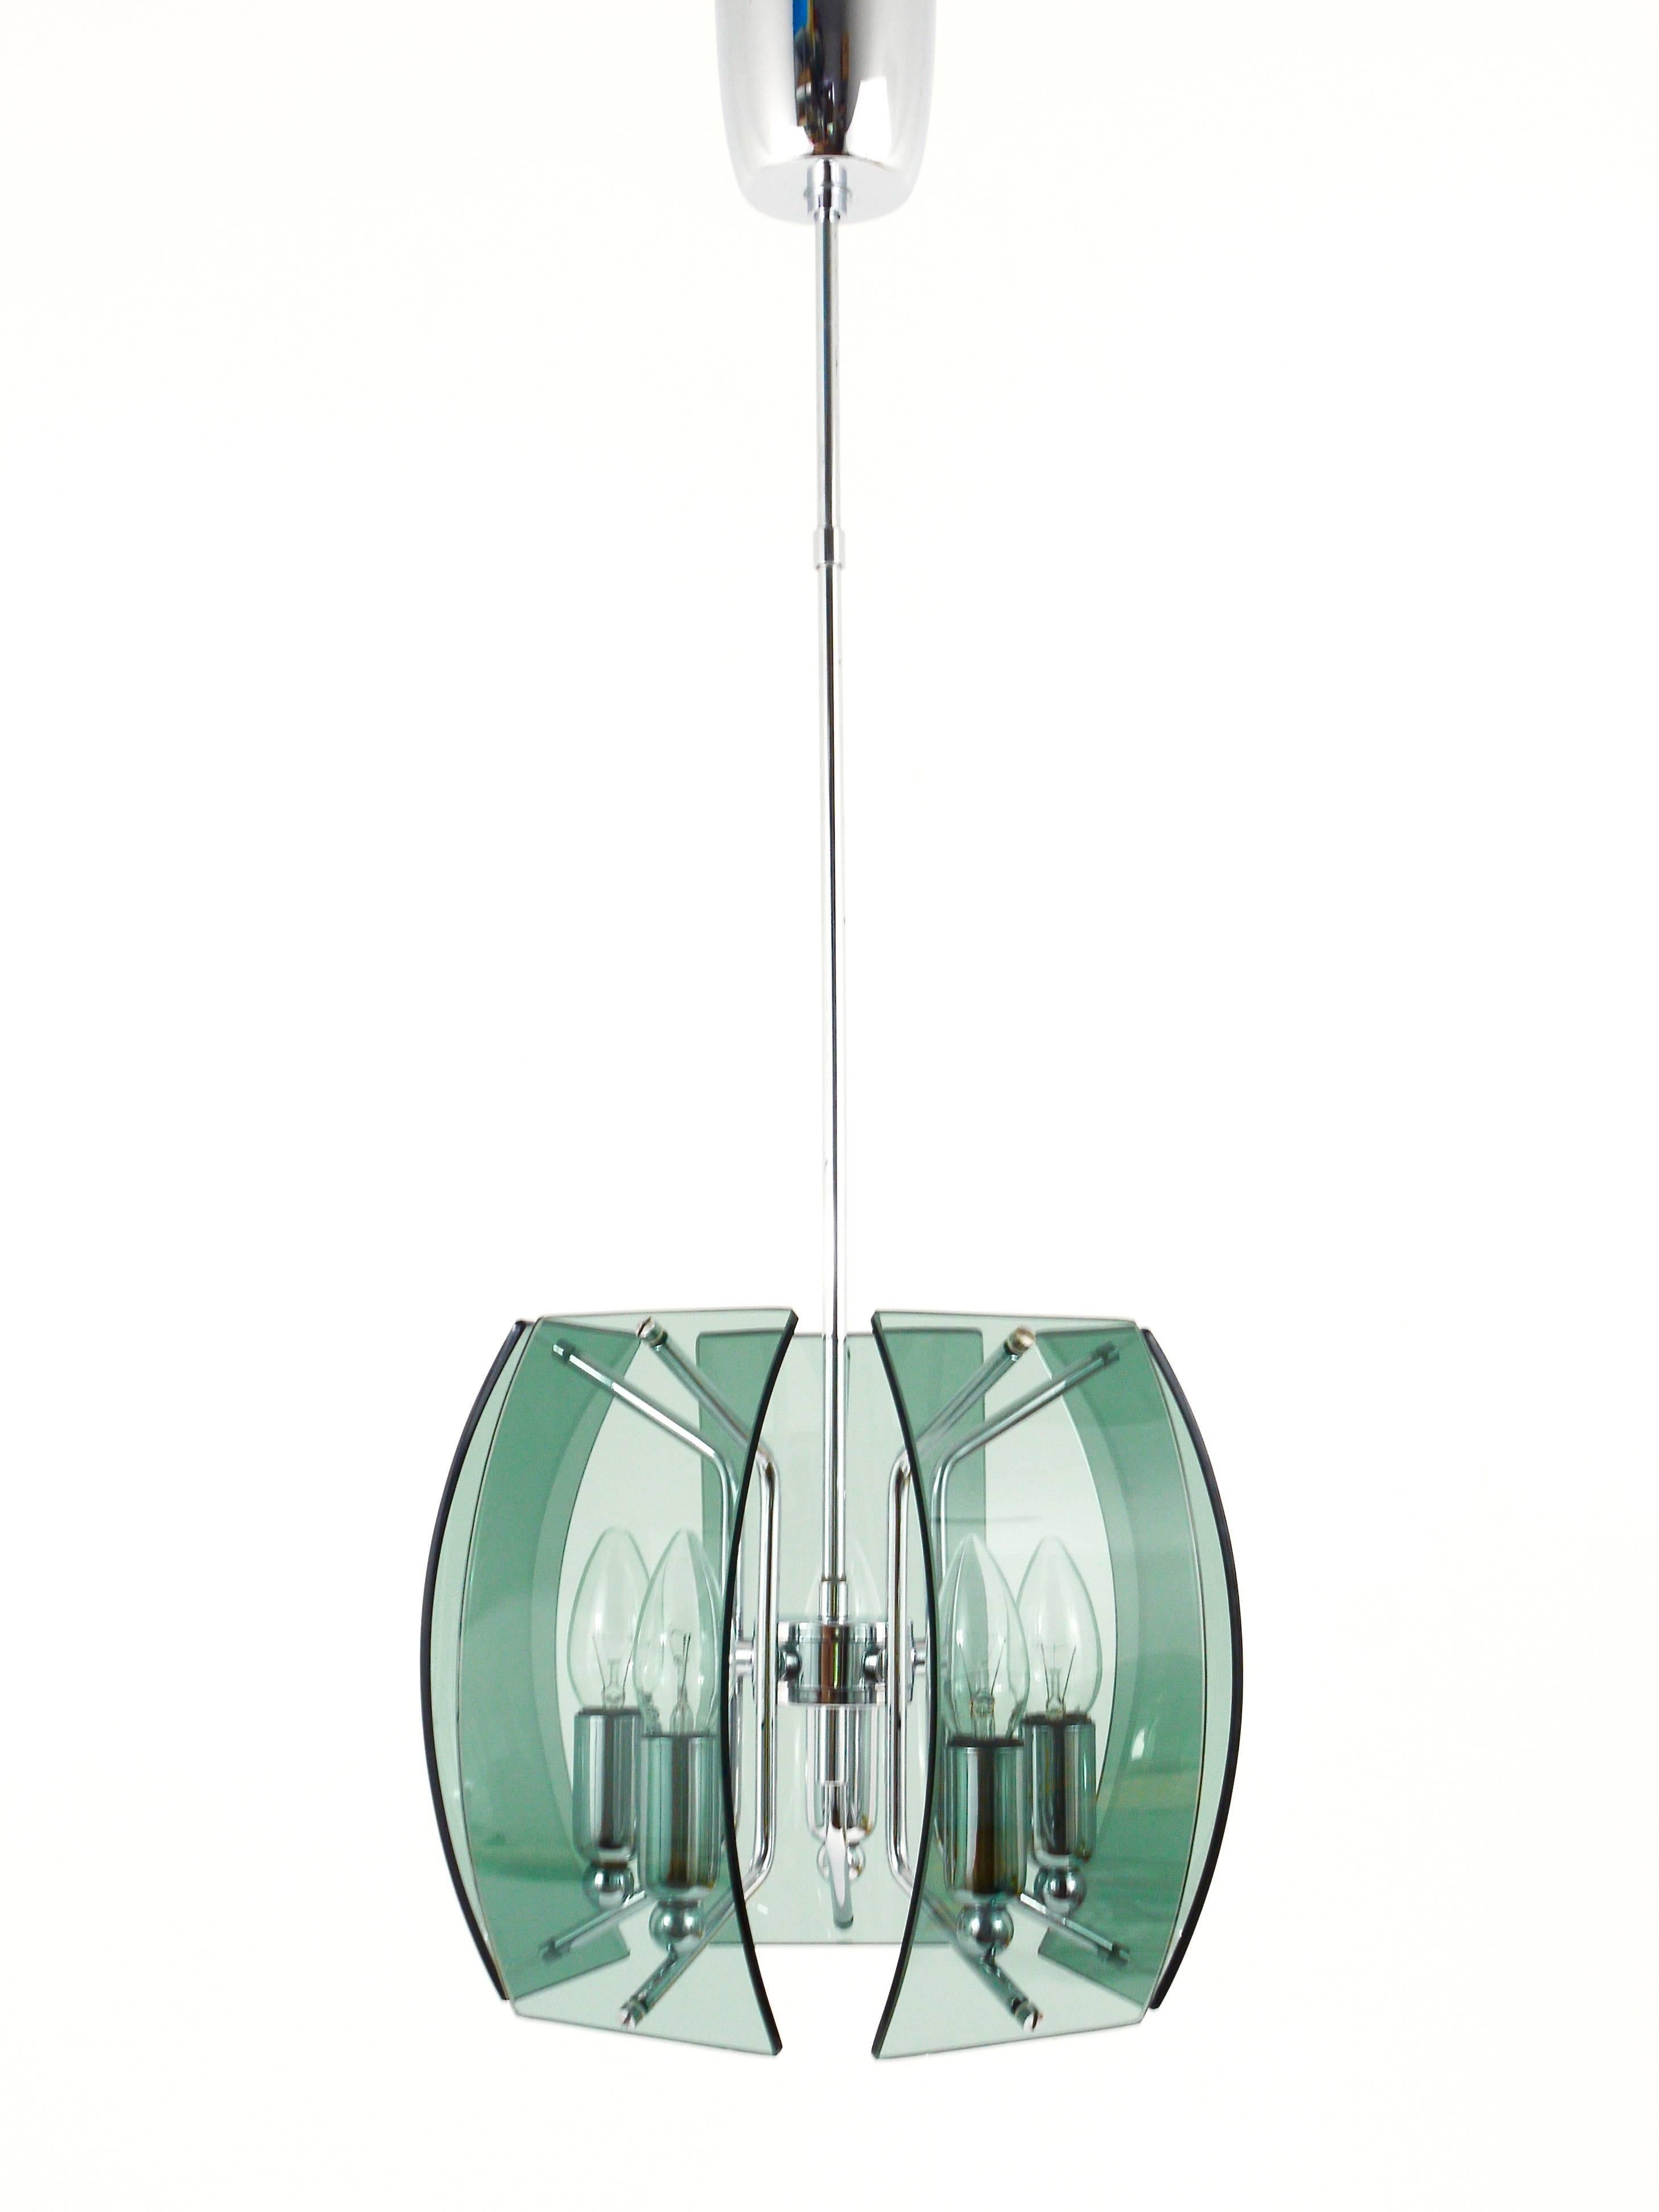 A beautiful Italian modernist glass pendant lamp from the 1960s. Five green/grey and curved glass panels on a chrome-plated five-arm frame. In very good condition. Height of stem can be adjusted upon request as a free service. 

Measurements: